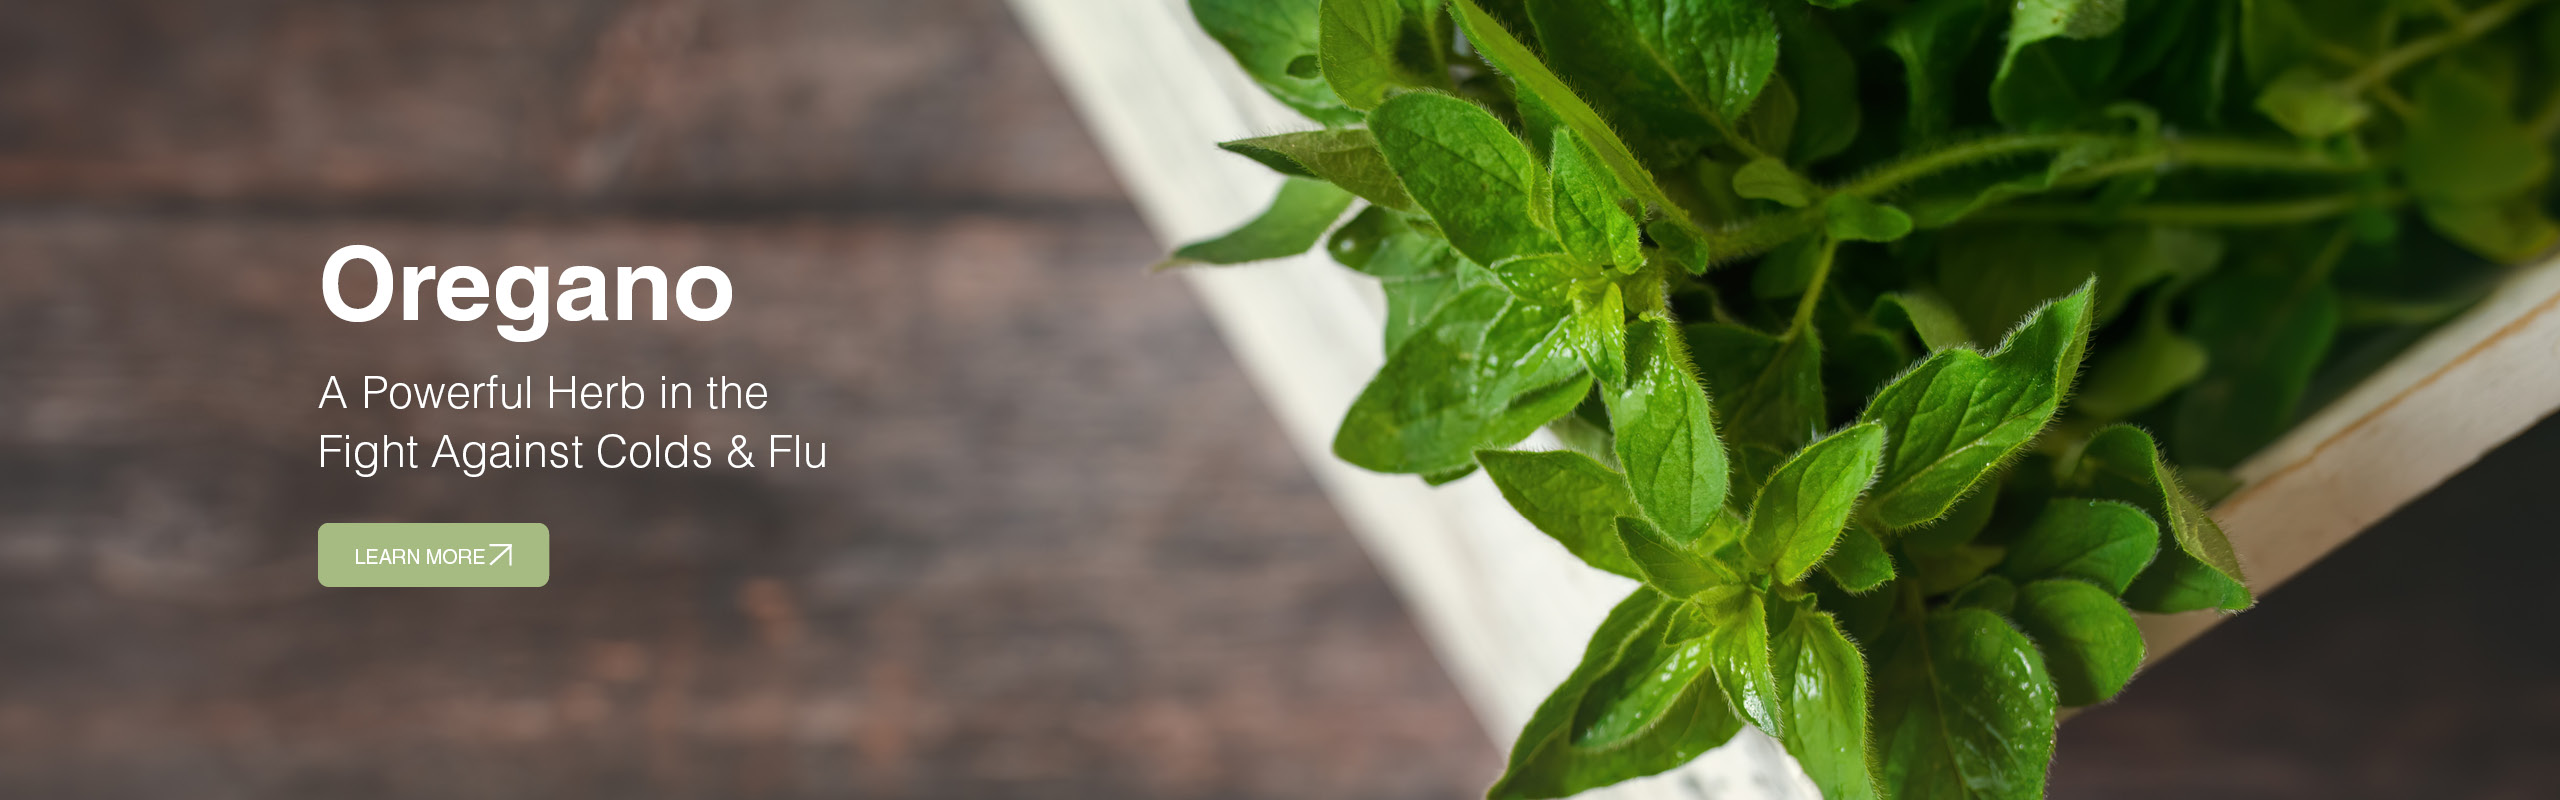 Oregano – a Powerful Herb in the Fight Against Colds & Flu